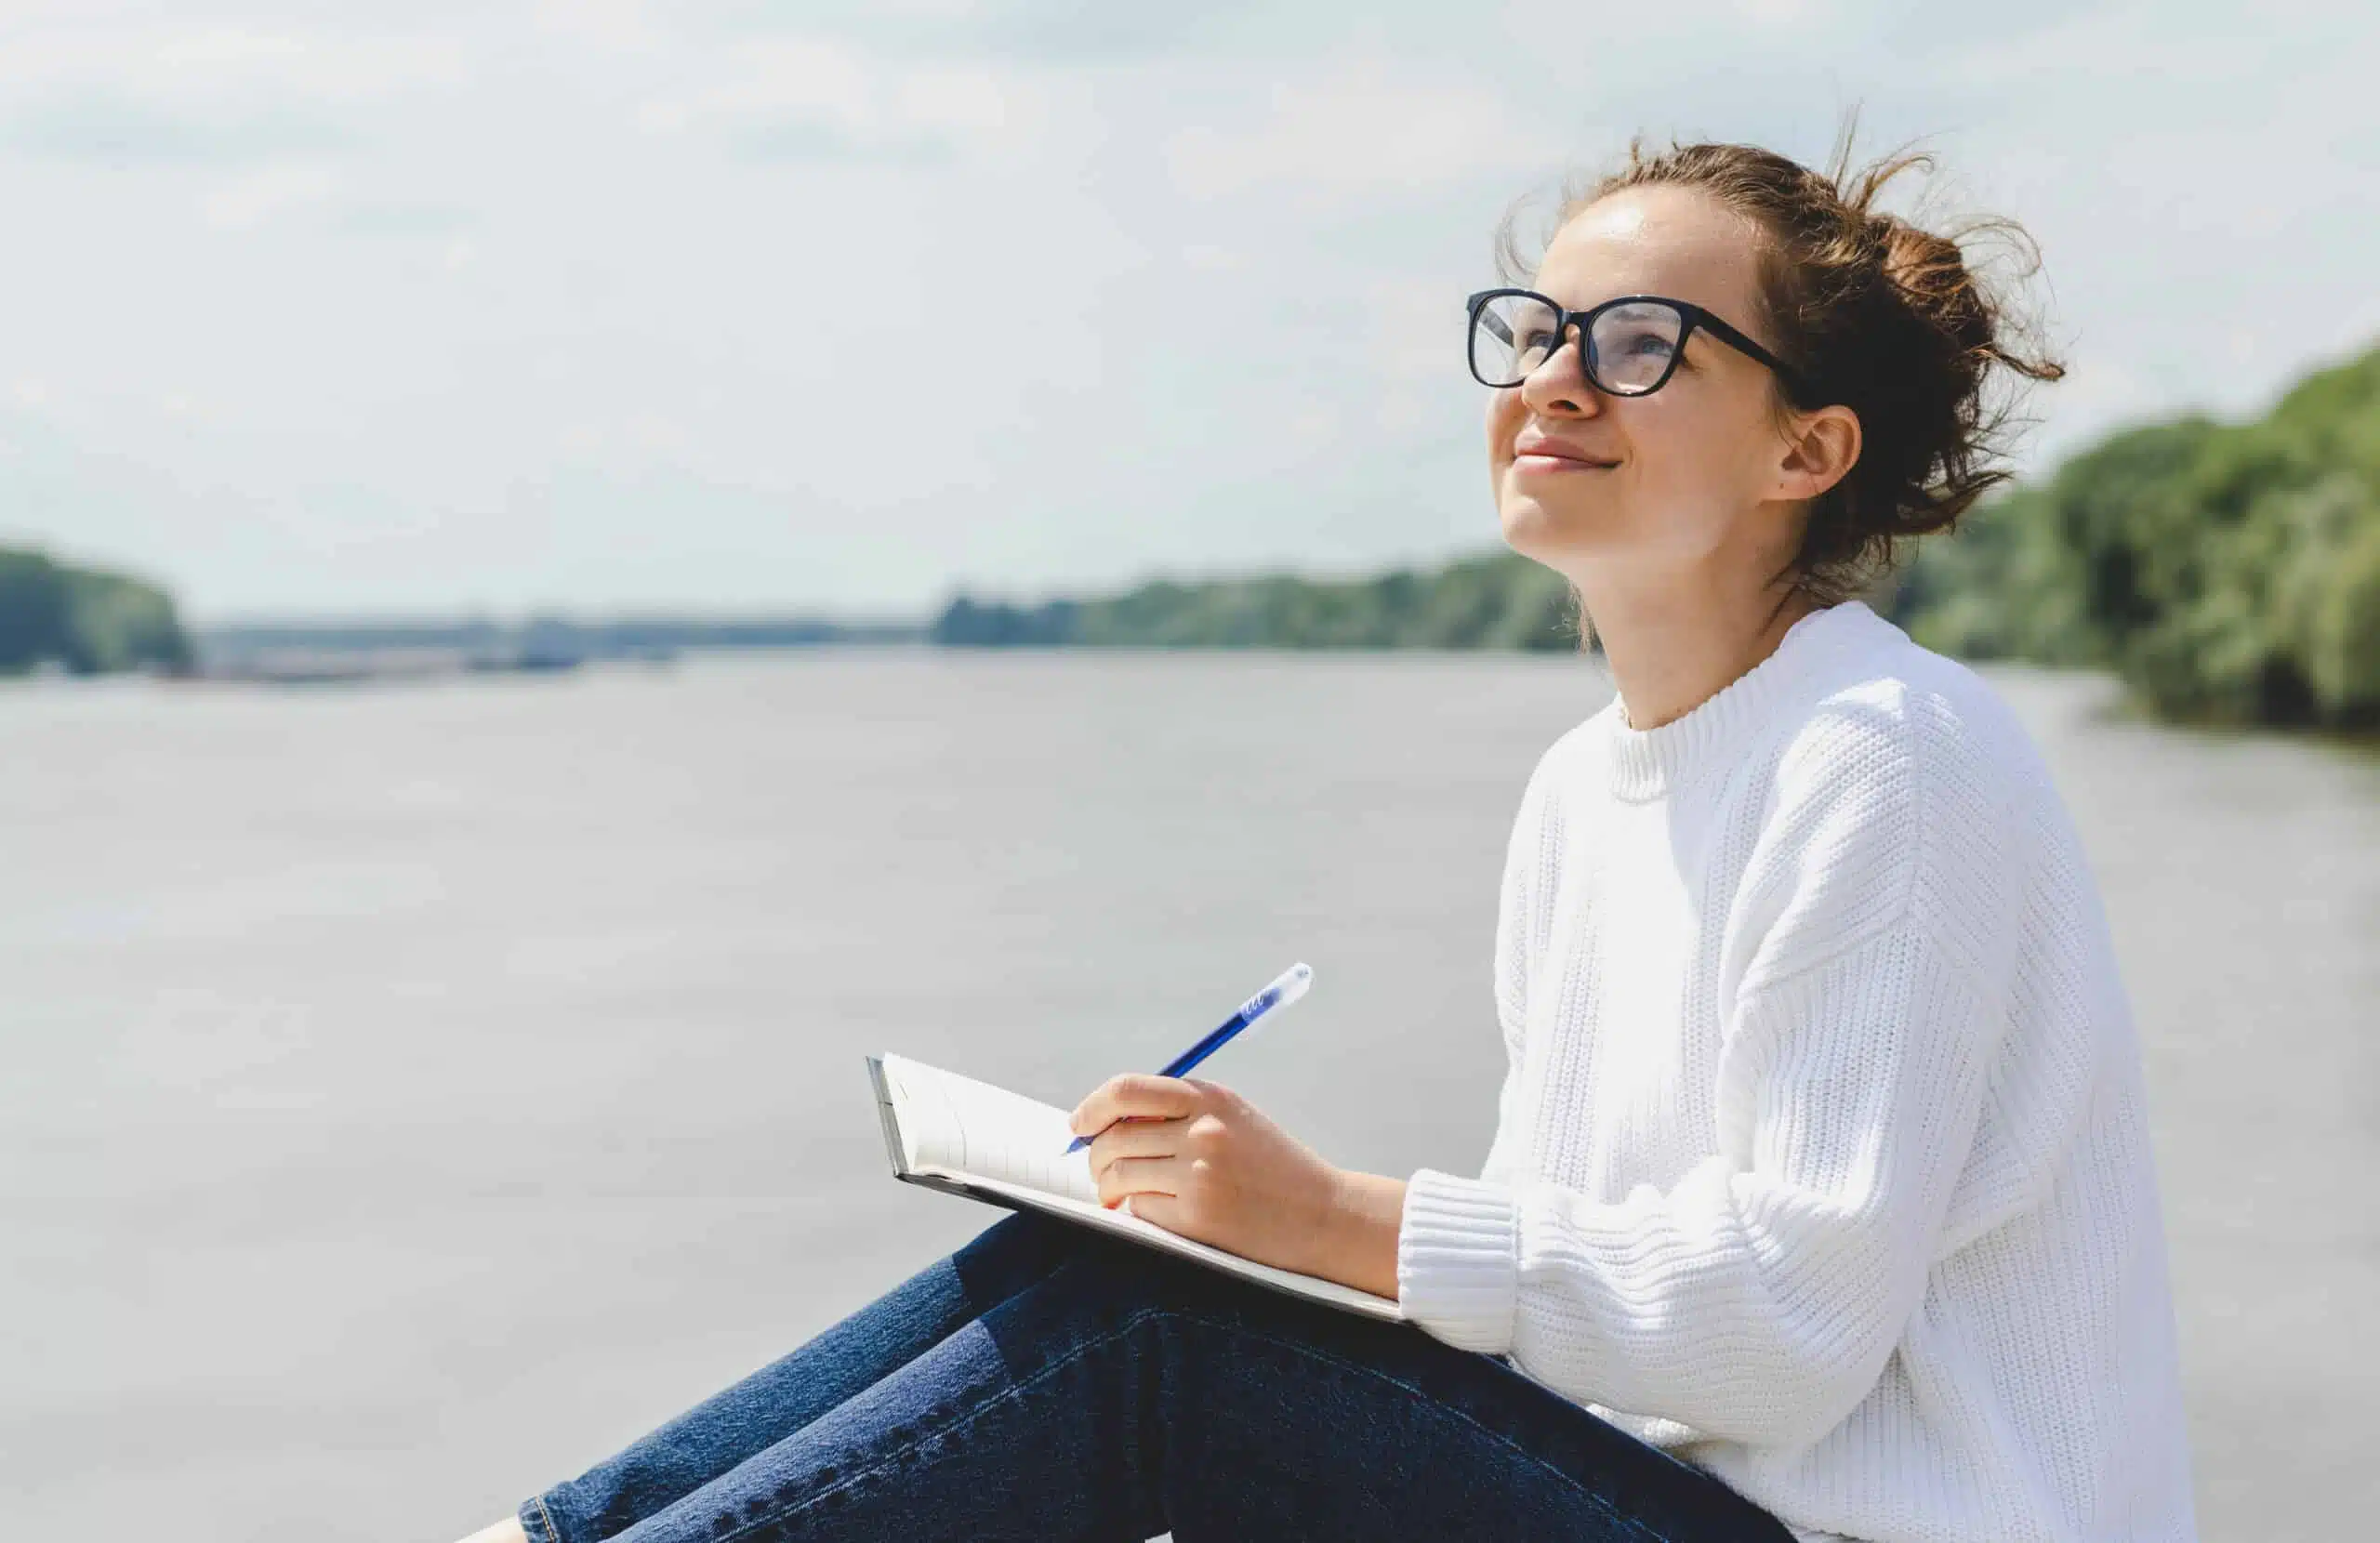 Young woman in glasses writes in notebook outdoors by the lake.